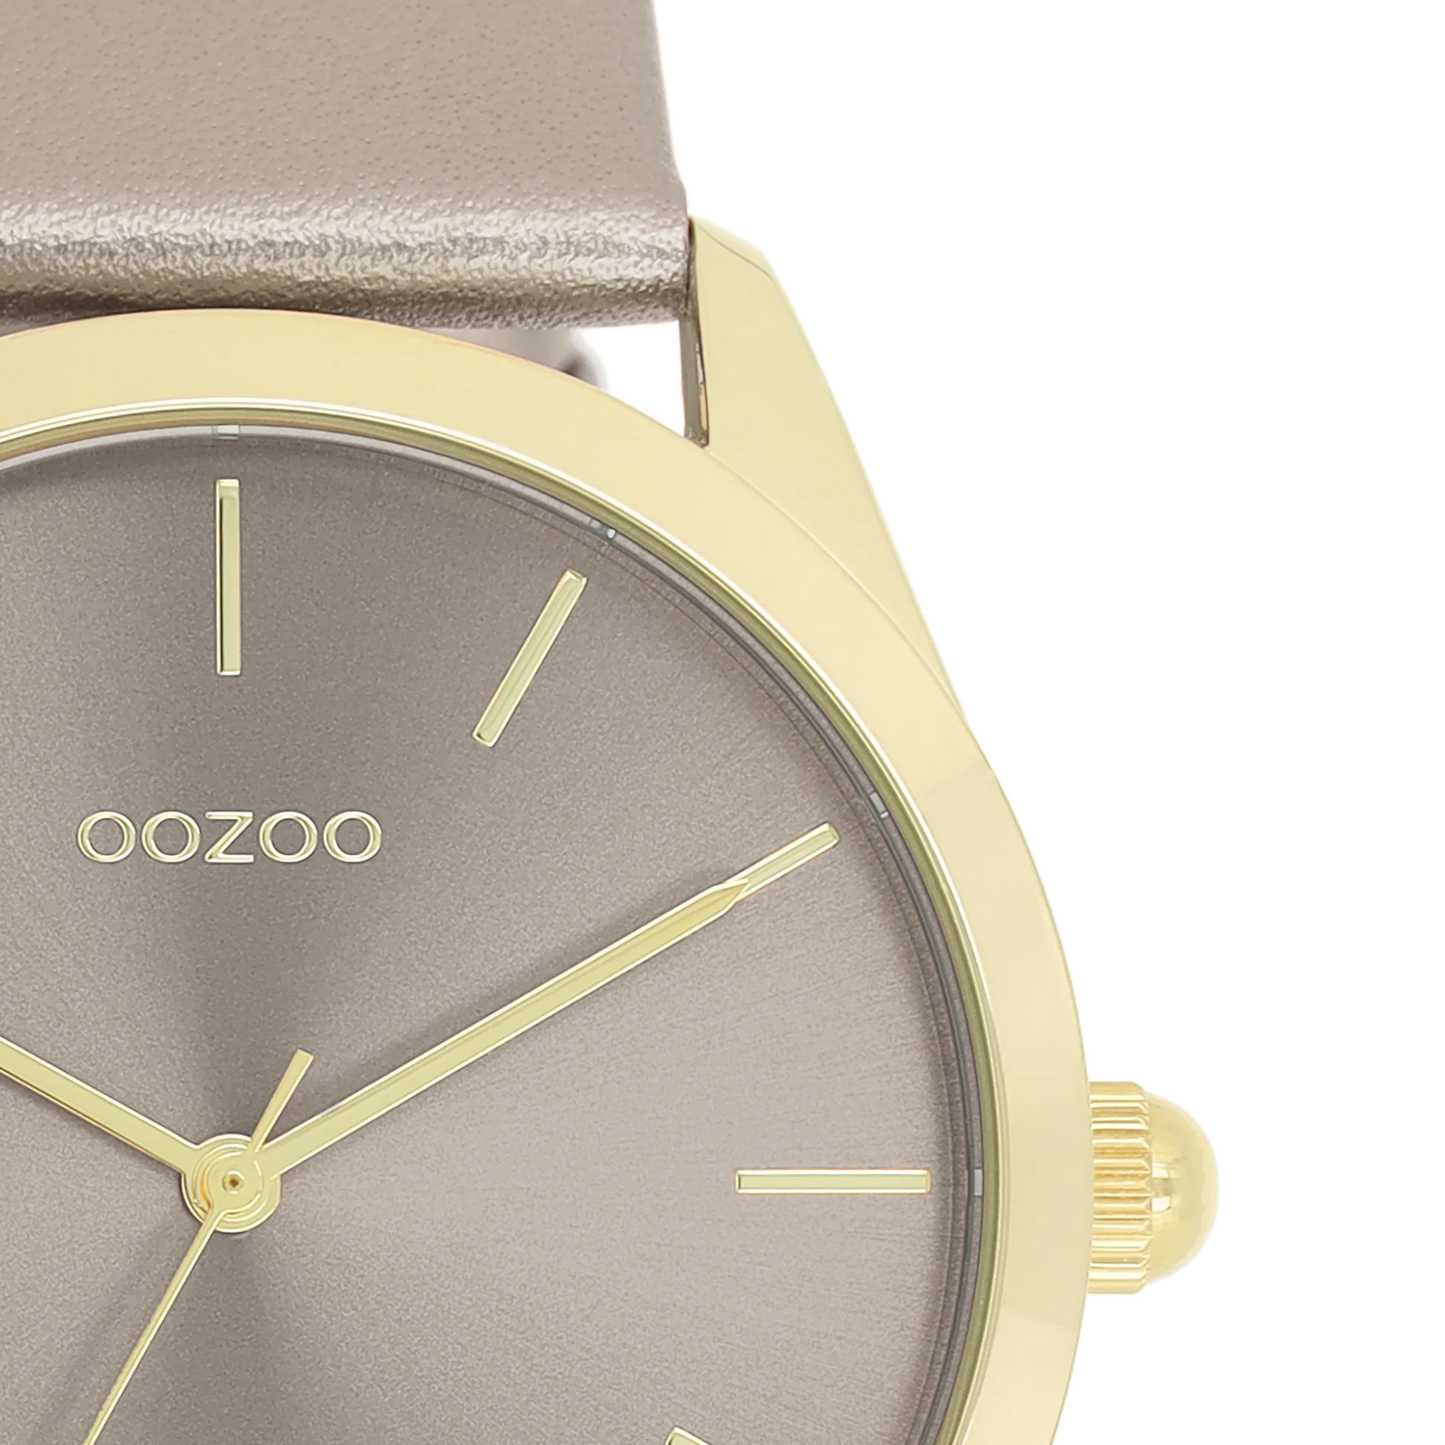 OOZOO C11333 40mm Timepieces Taupe Leather Strap